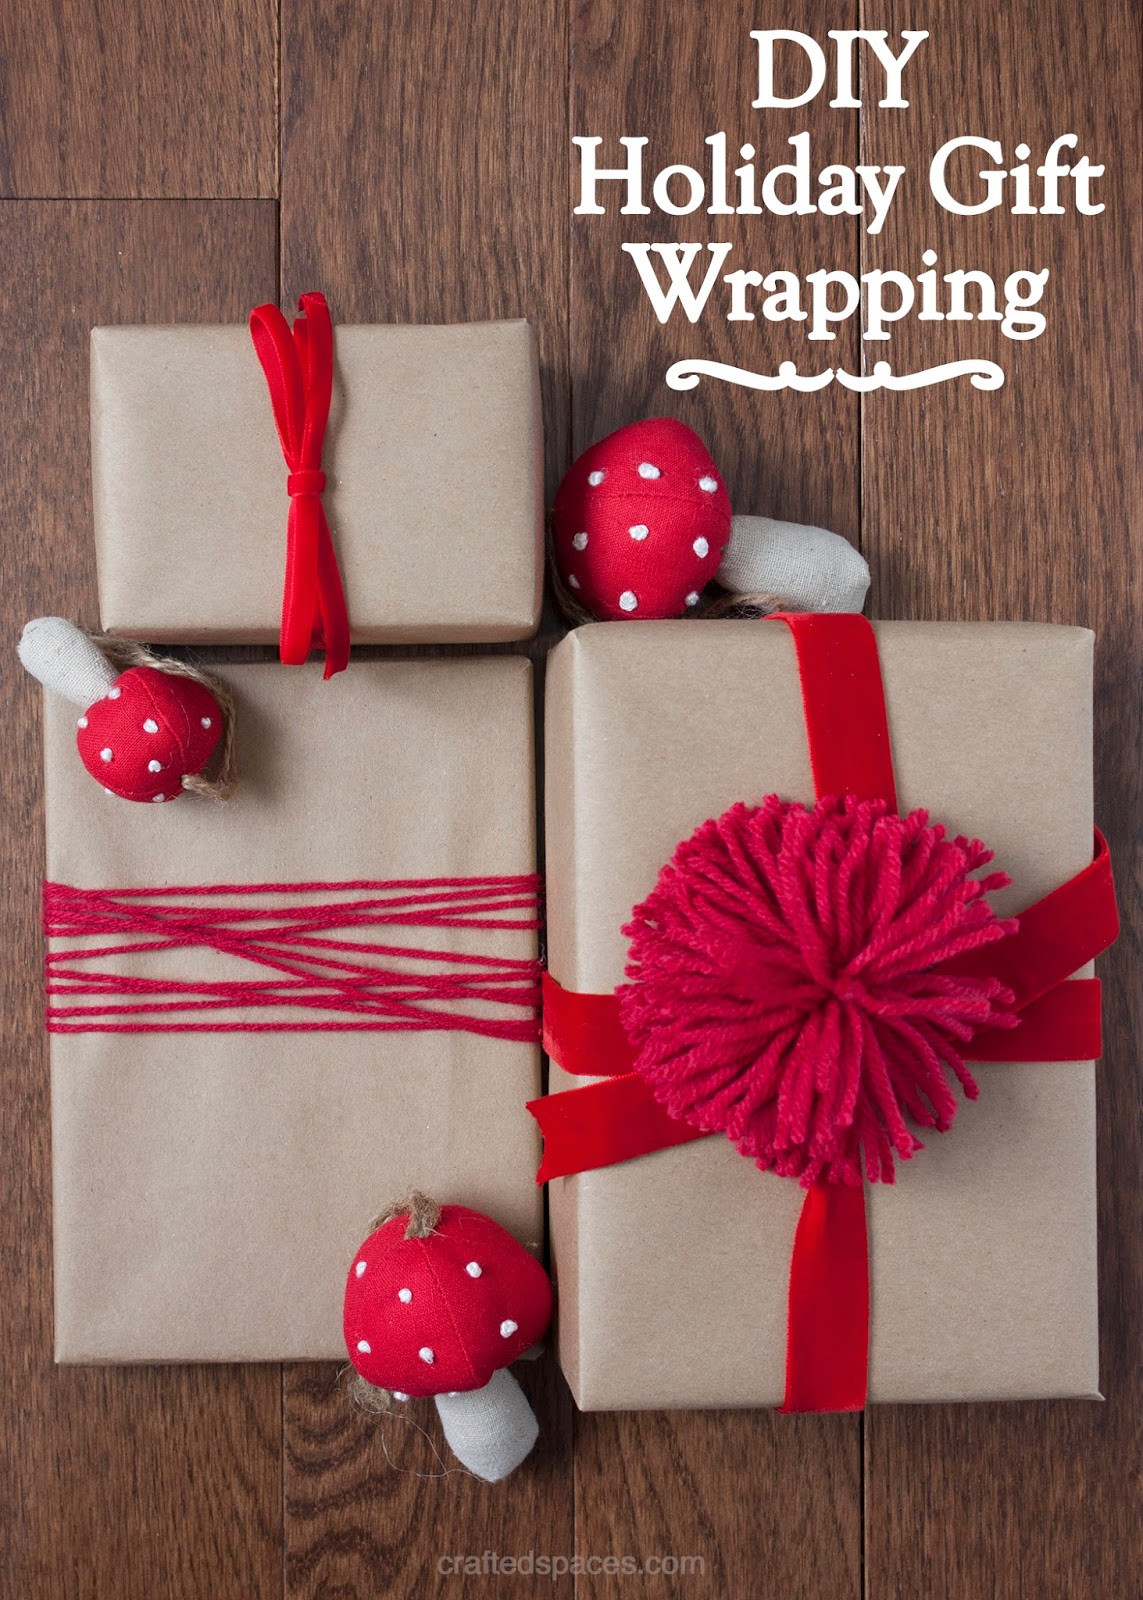 Gift Wrap DIY
 Crafted Spaces DIY Holiday Gift Wrapping